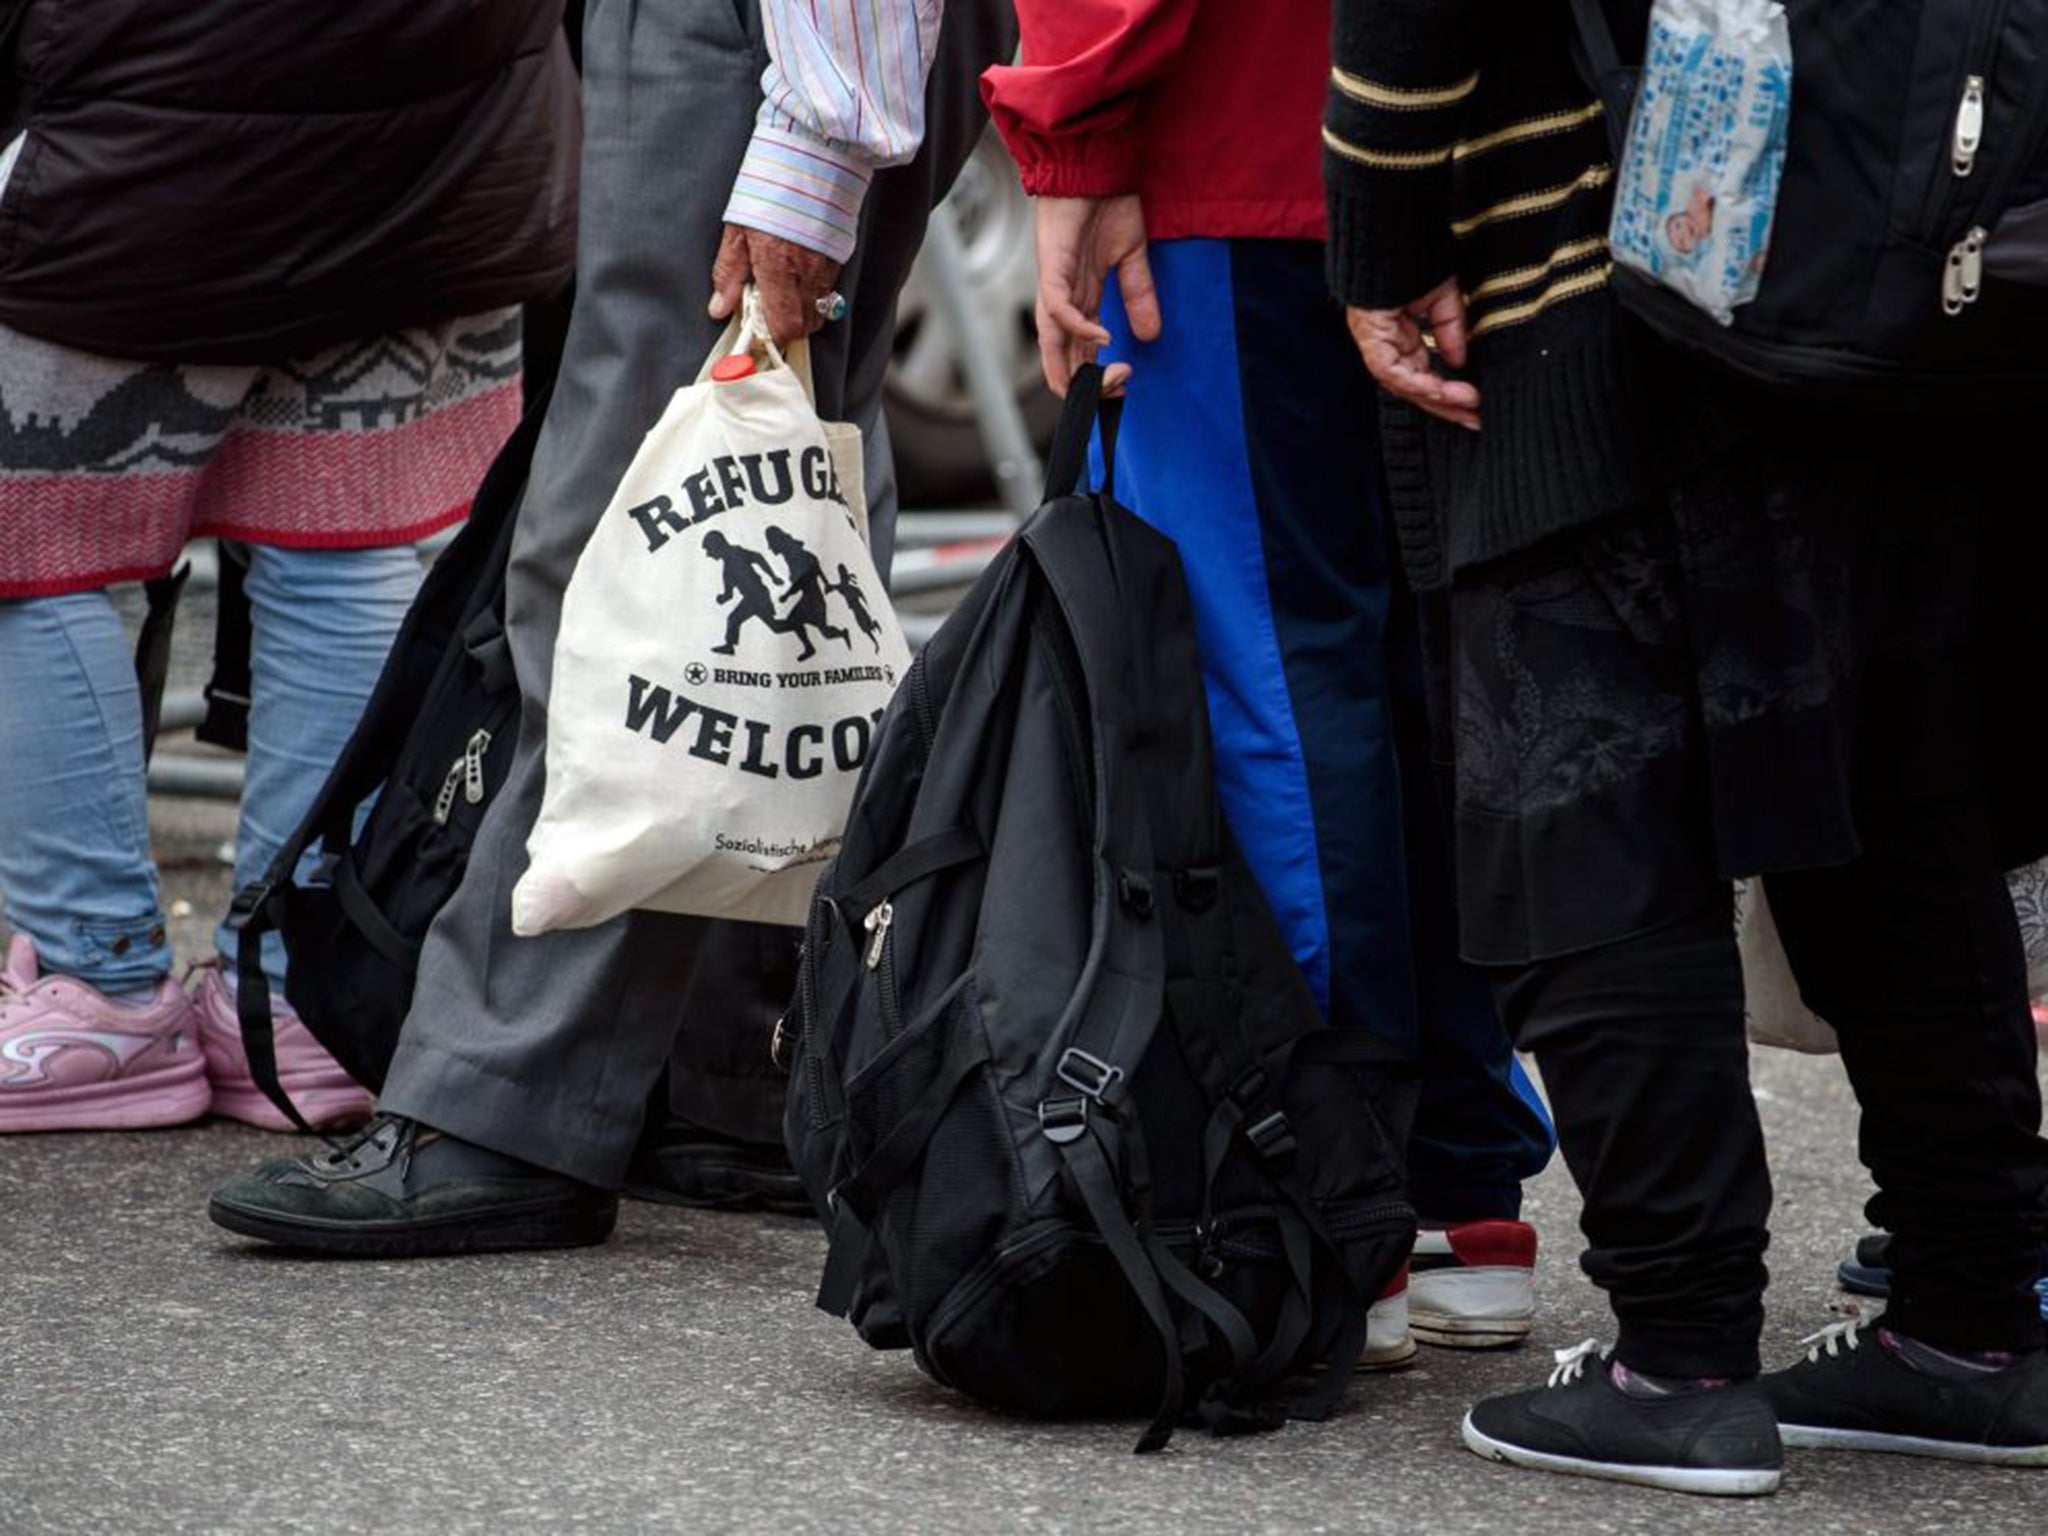 A refugee carries a bag which reads 'Refugees Welcome' upon his arrival at the main train station in Munich (EPA)